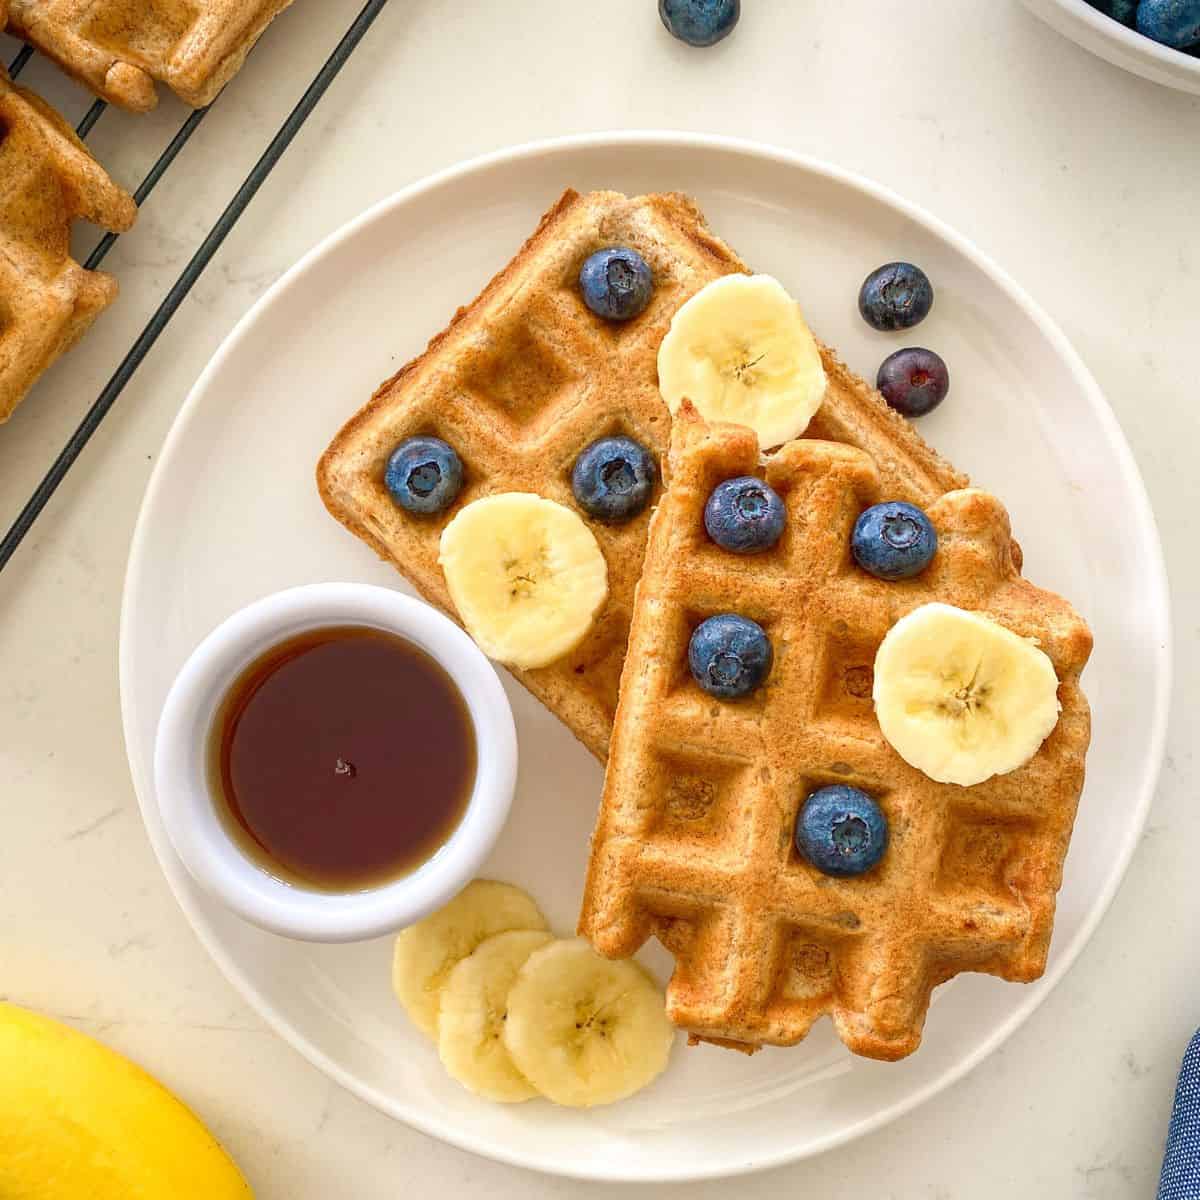 Plate with two waffles, with banana slices and blueberries on top.